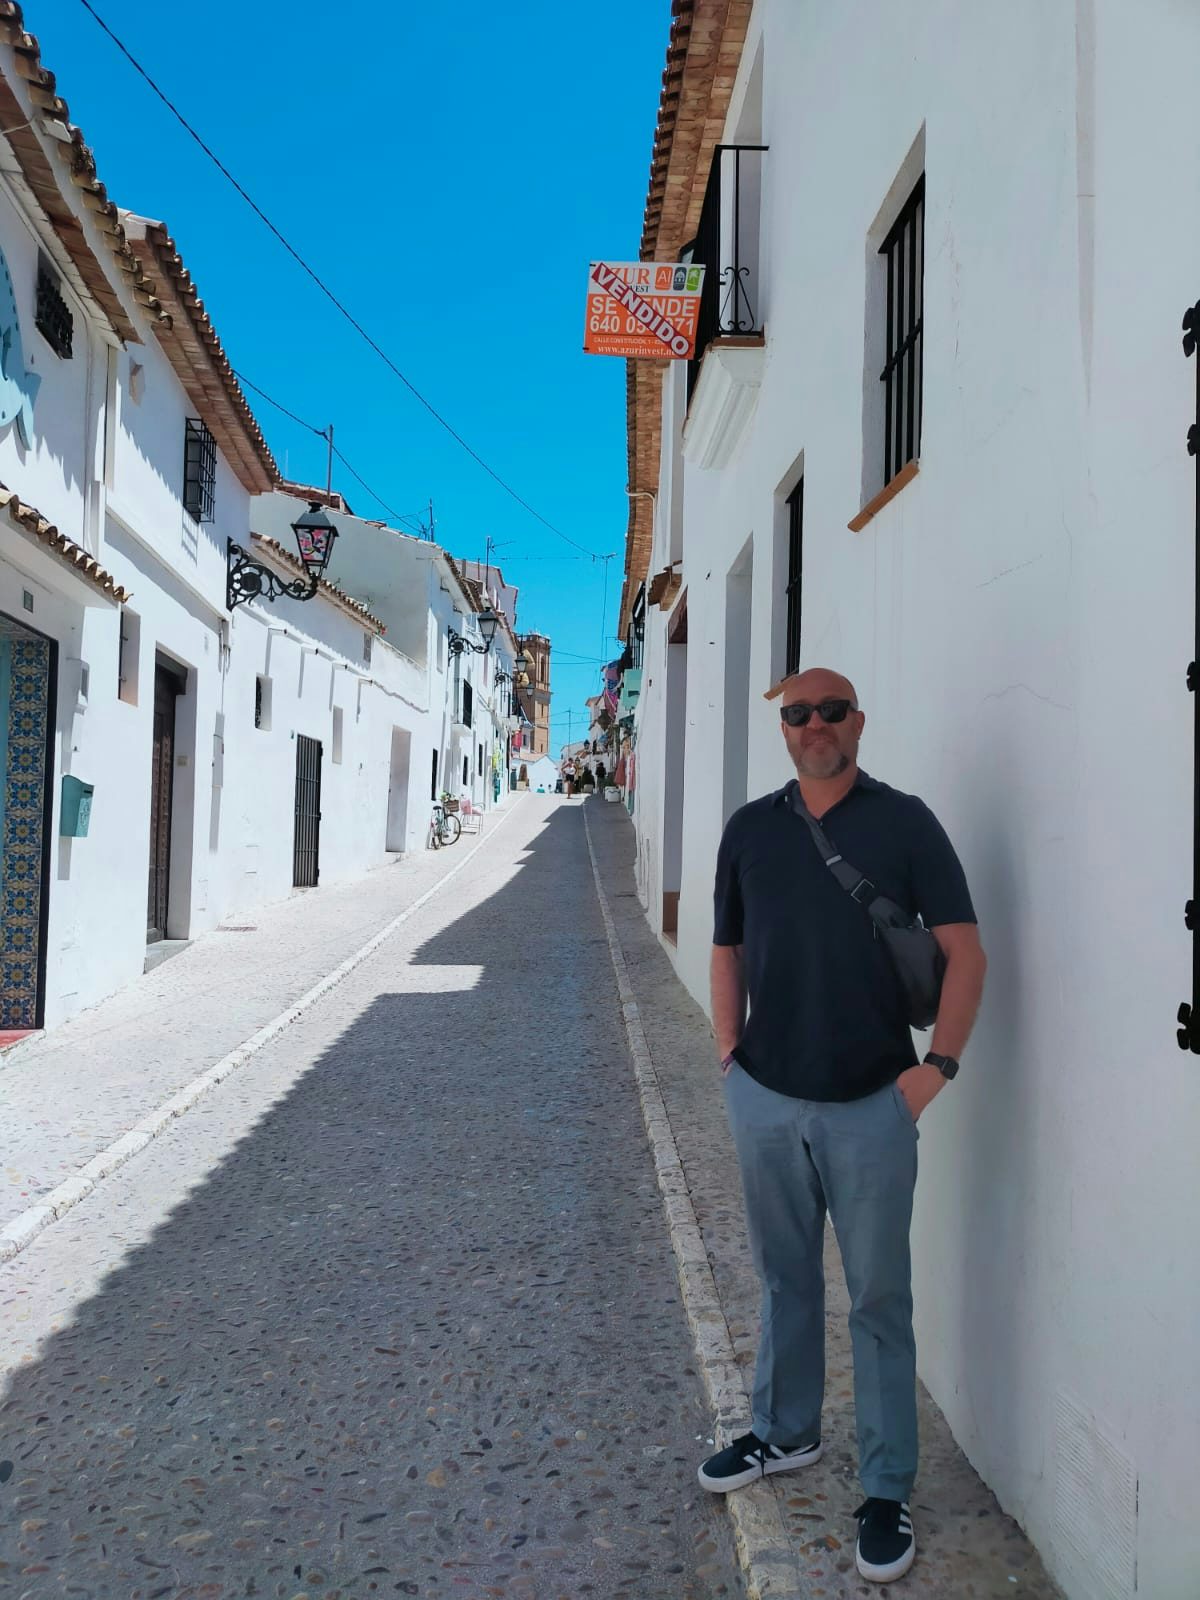 Travel Advisor James Joseph Sterrett Alarcon stands on the stone sidewalk of a street surrounded by white buildingd under a bright blue sky